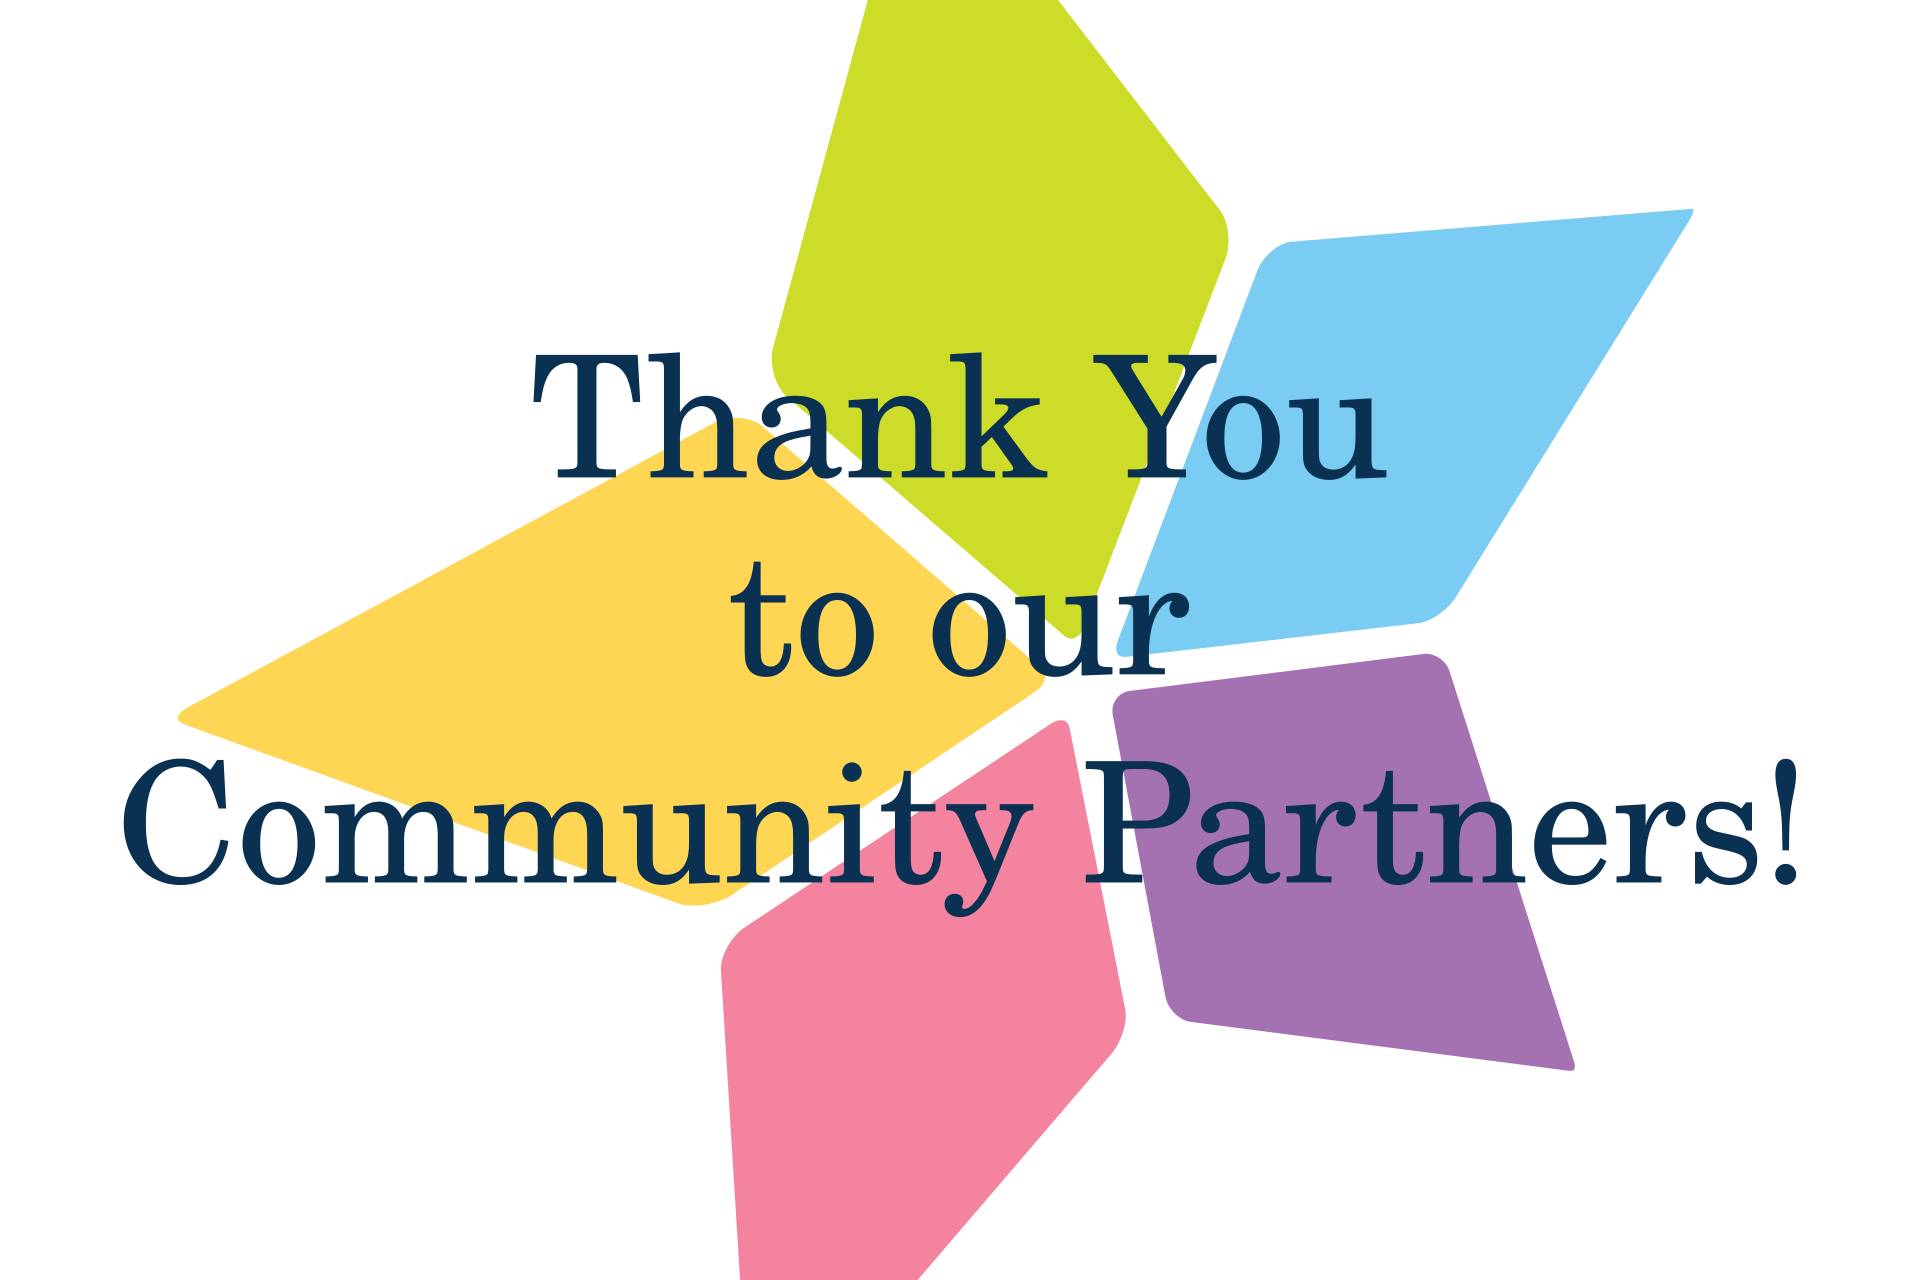 Thank You to our Community Partners!